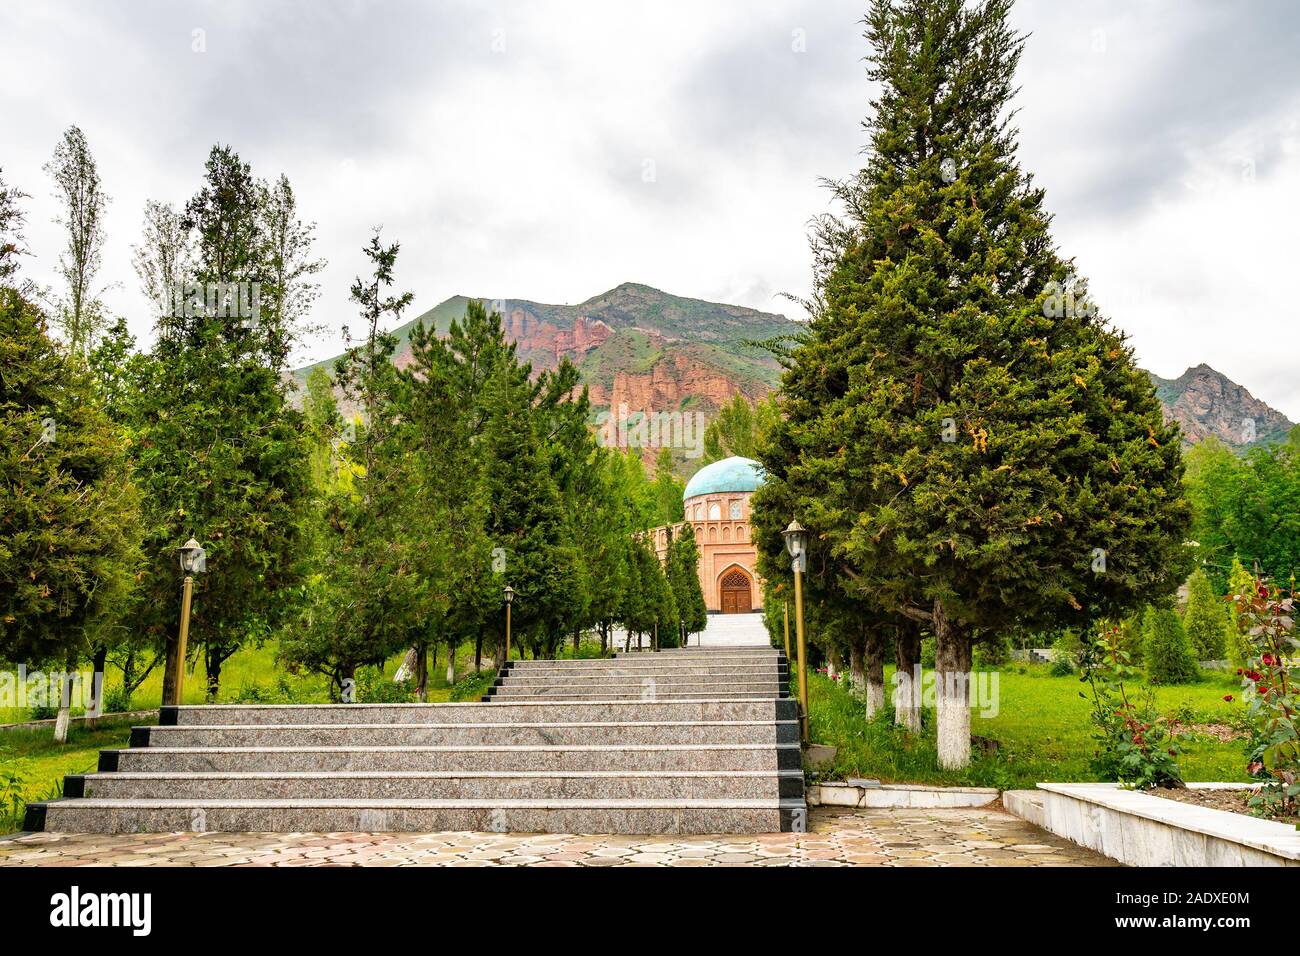 Panjrud Abu Abdullah Rudaki Mausoleum Picturesque View of the Tomb on a Cloudy Rainy Day Stock Photo